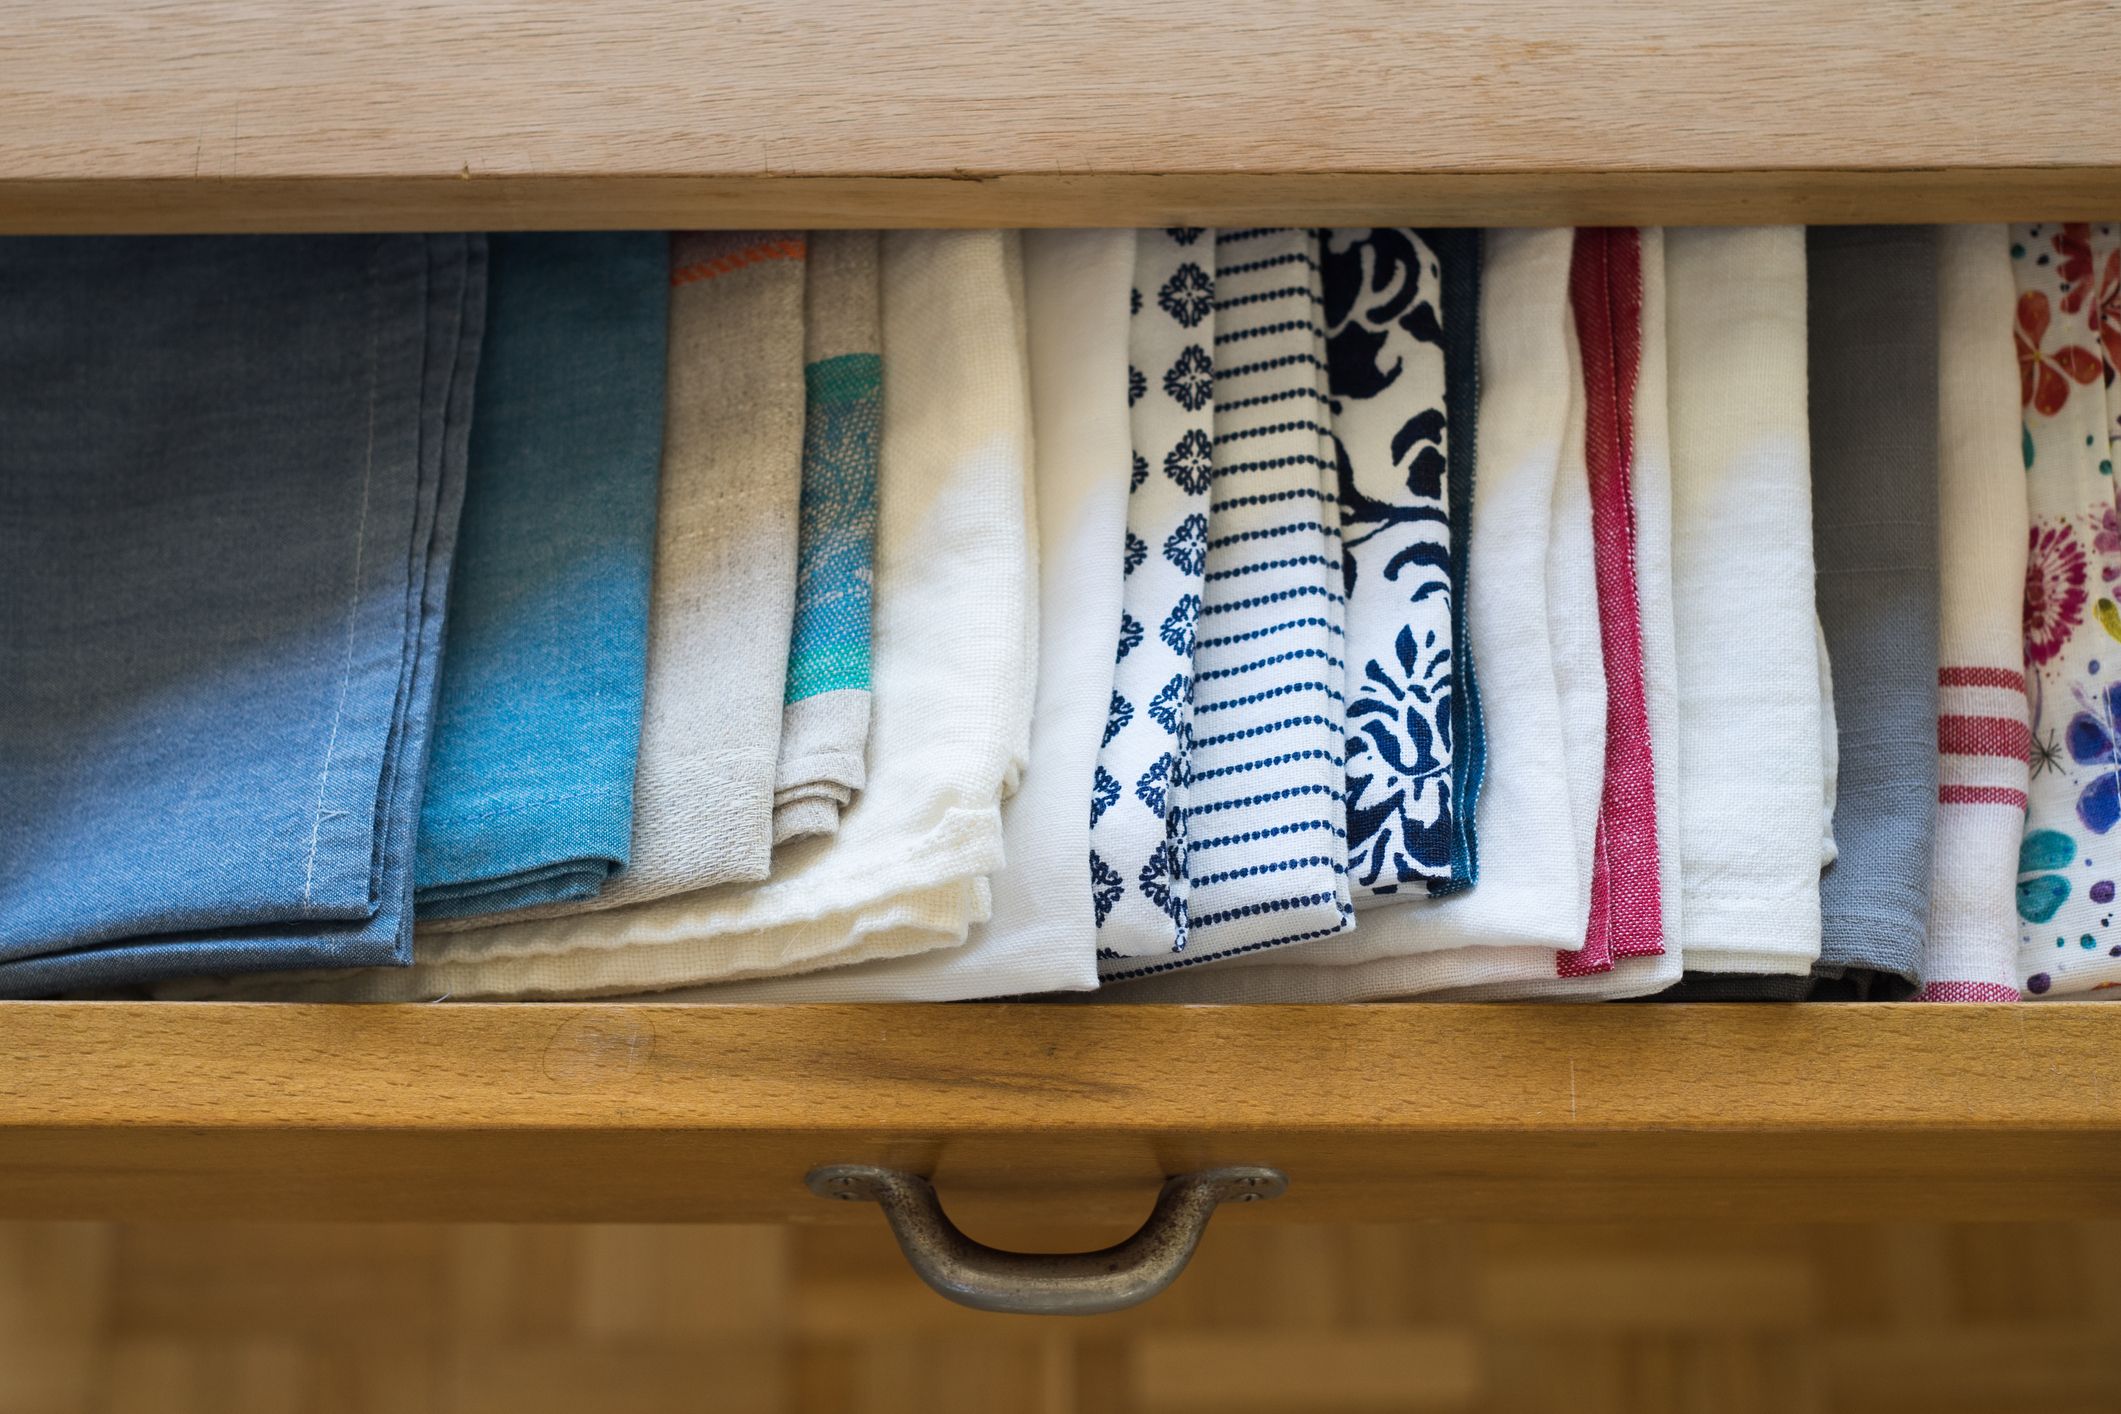 https://hips.hearstapps.com/hmg-prod/images/how-to-organize-kitchen-cabinets-dish-towel-drawer-65849e1e2c317.jpg